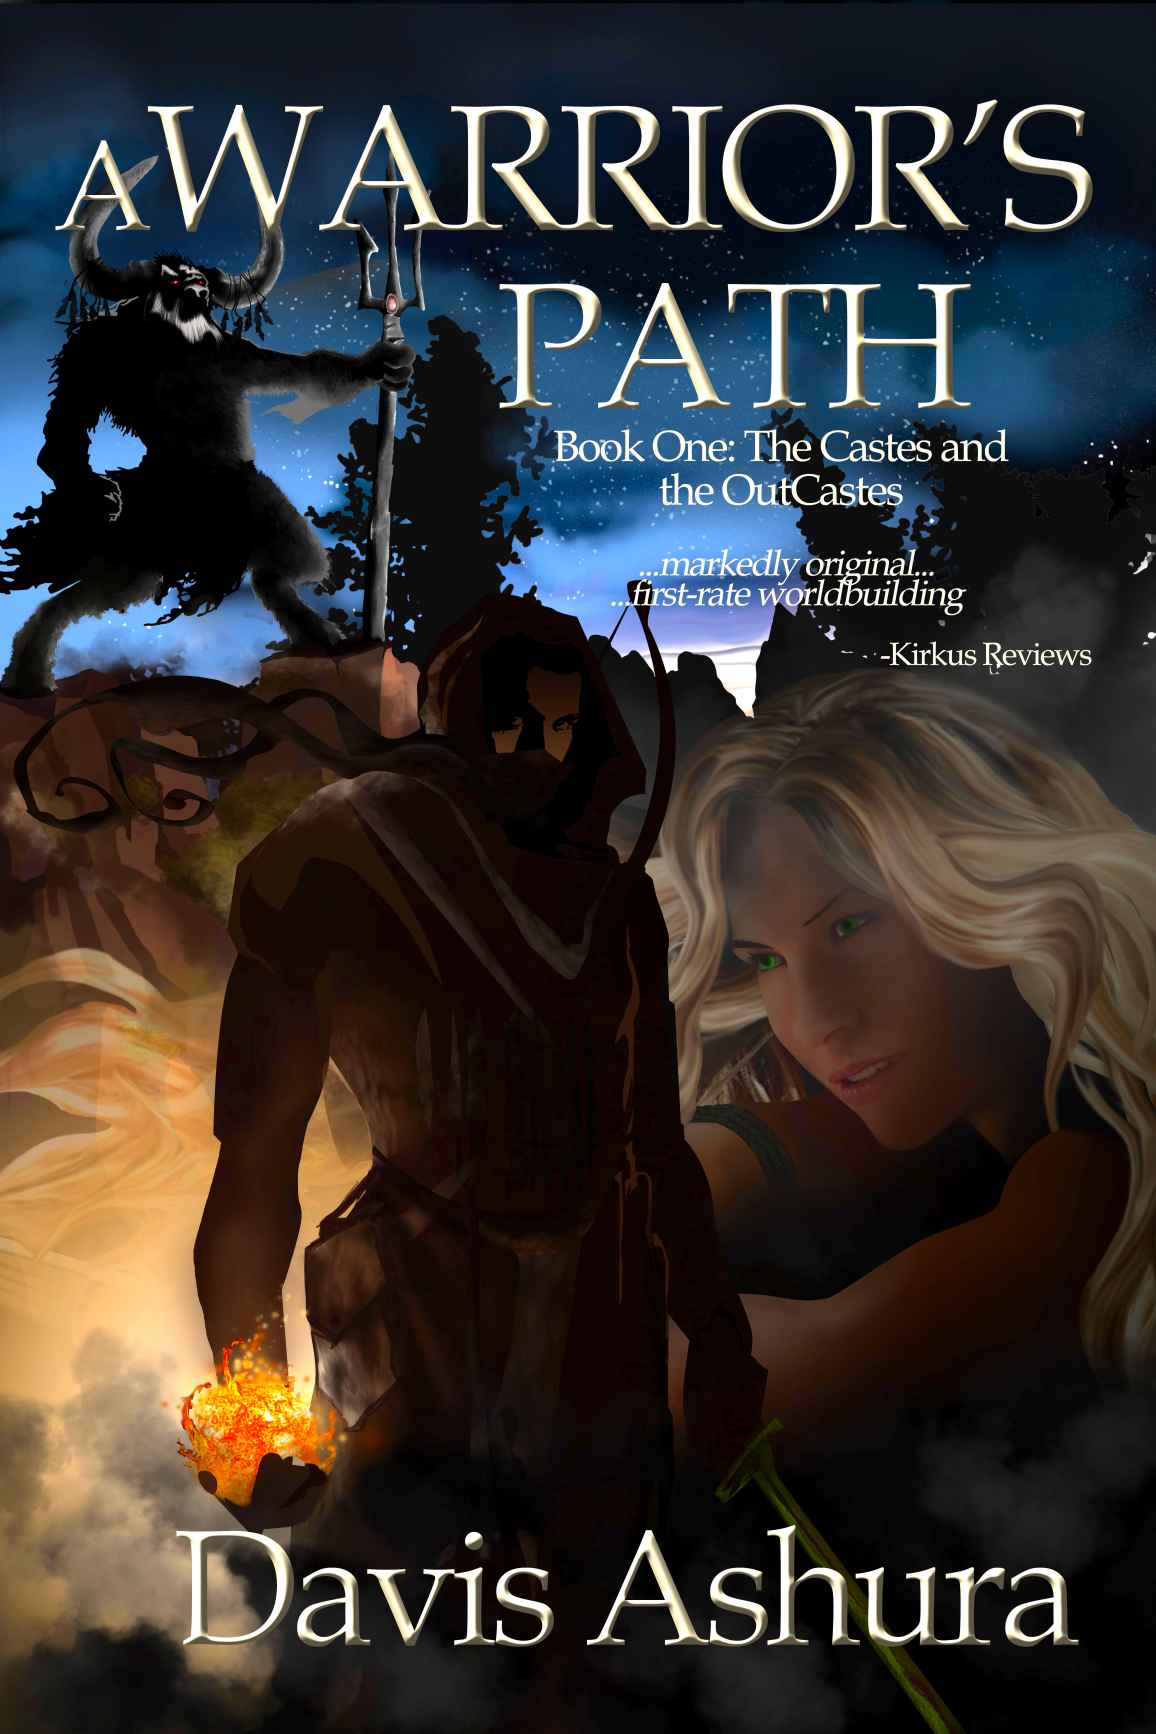 A Warrior's Path (The Castes and the OutCastes)